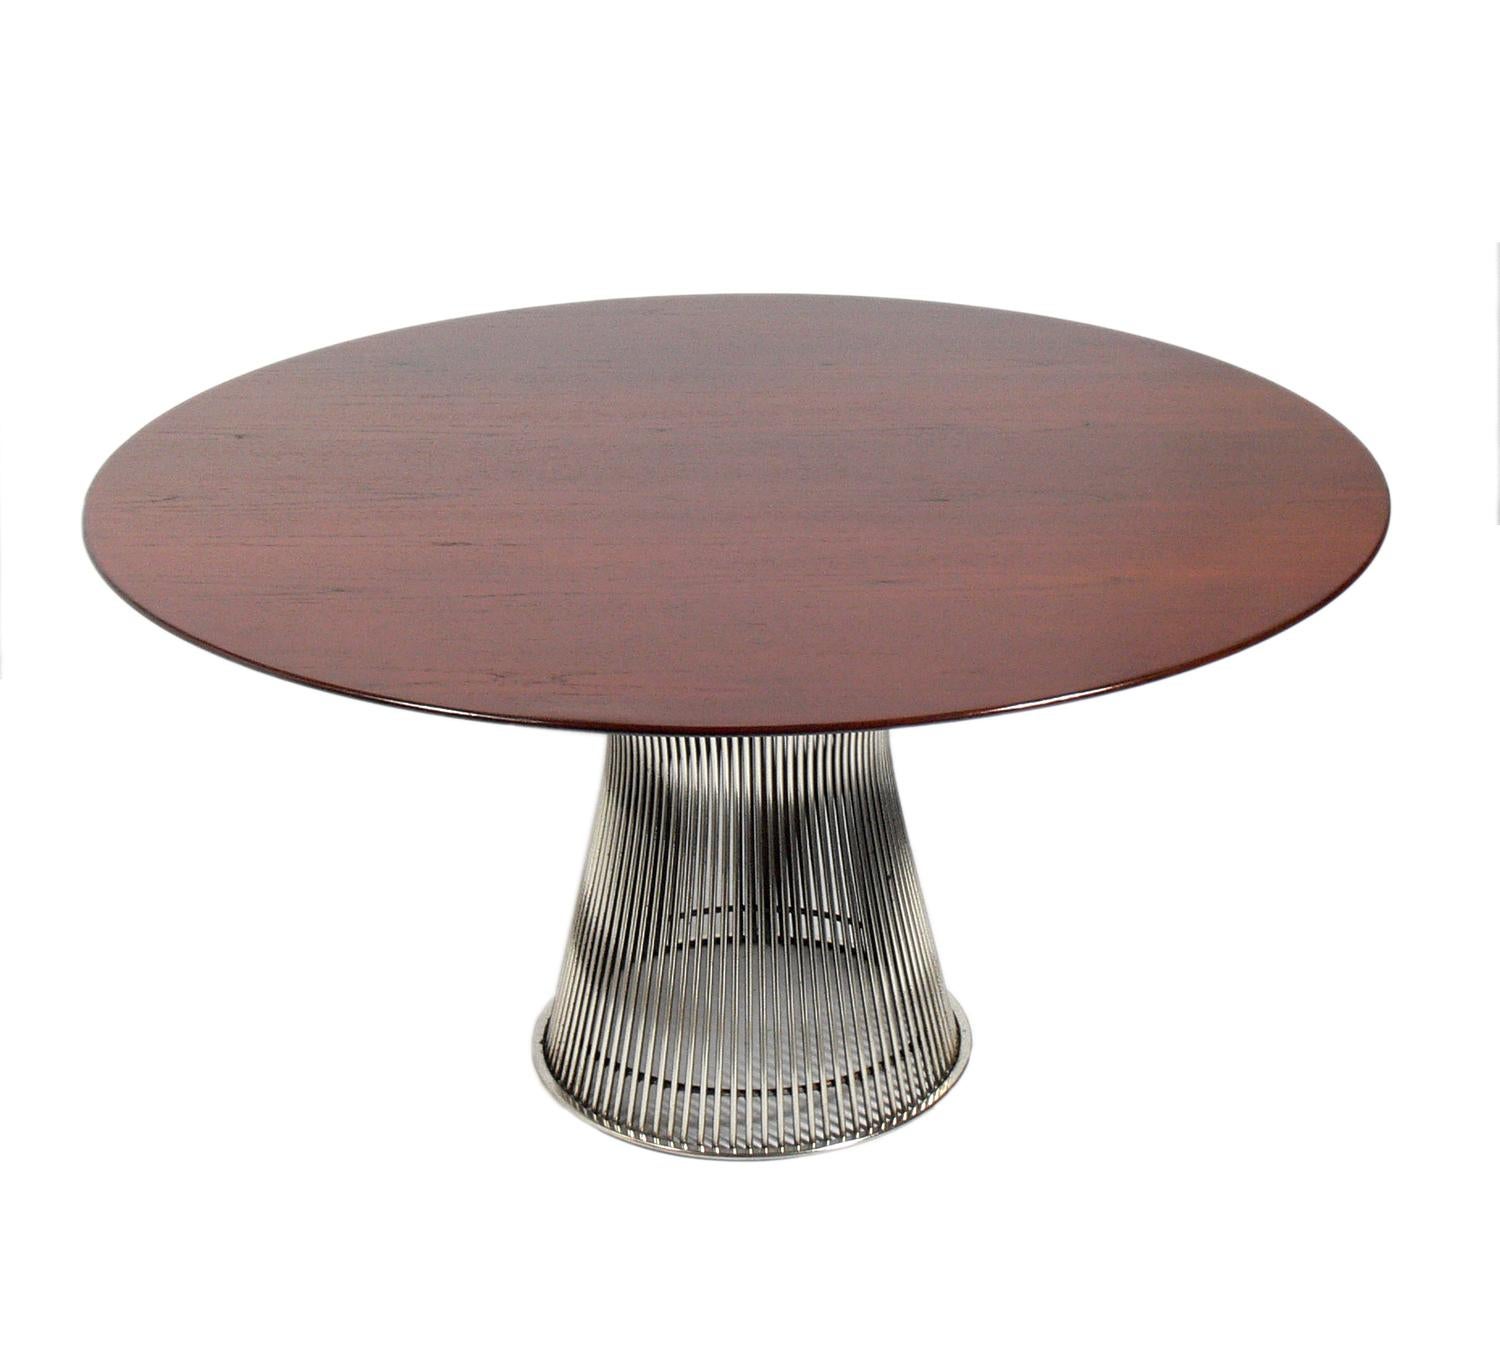 Sculptural walnut and chrome dining table, designed by Warren Platner for Knoll, circa 1960s. The walnut top has been refinished and exhibits beautiful graining. This listing is for the dining table only.